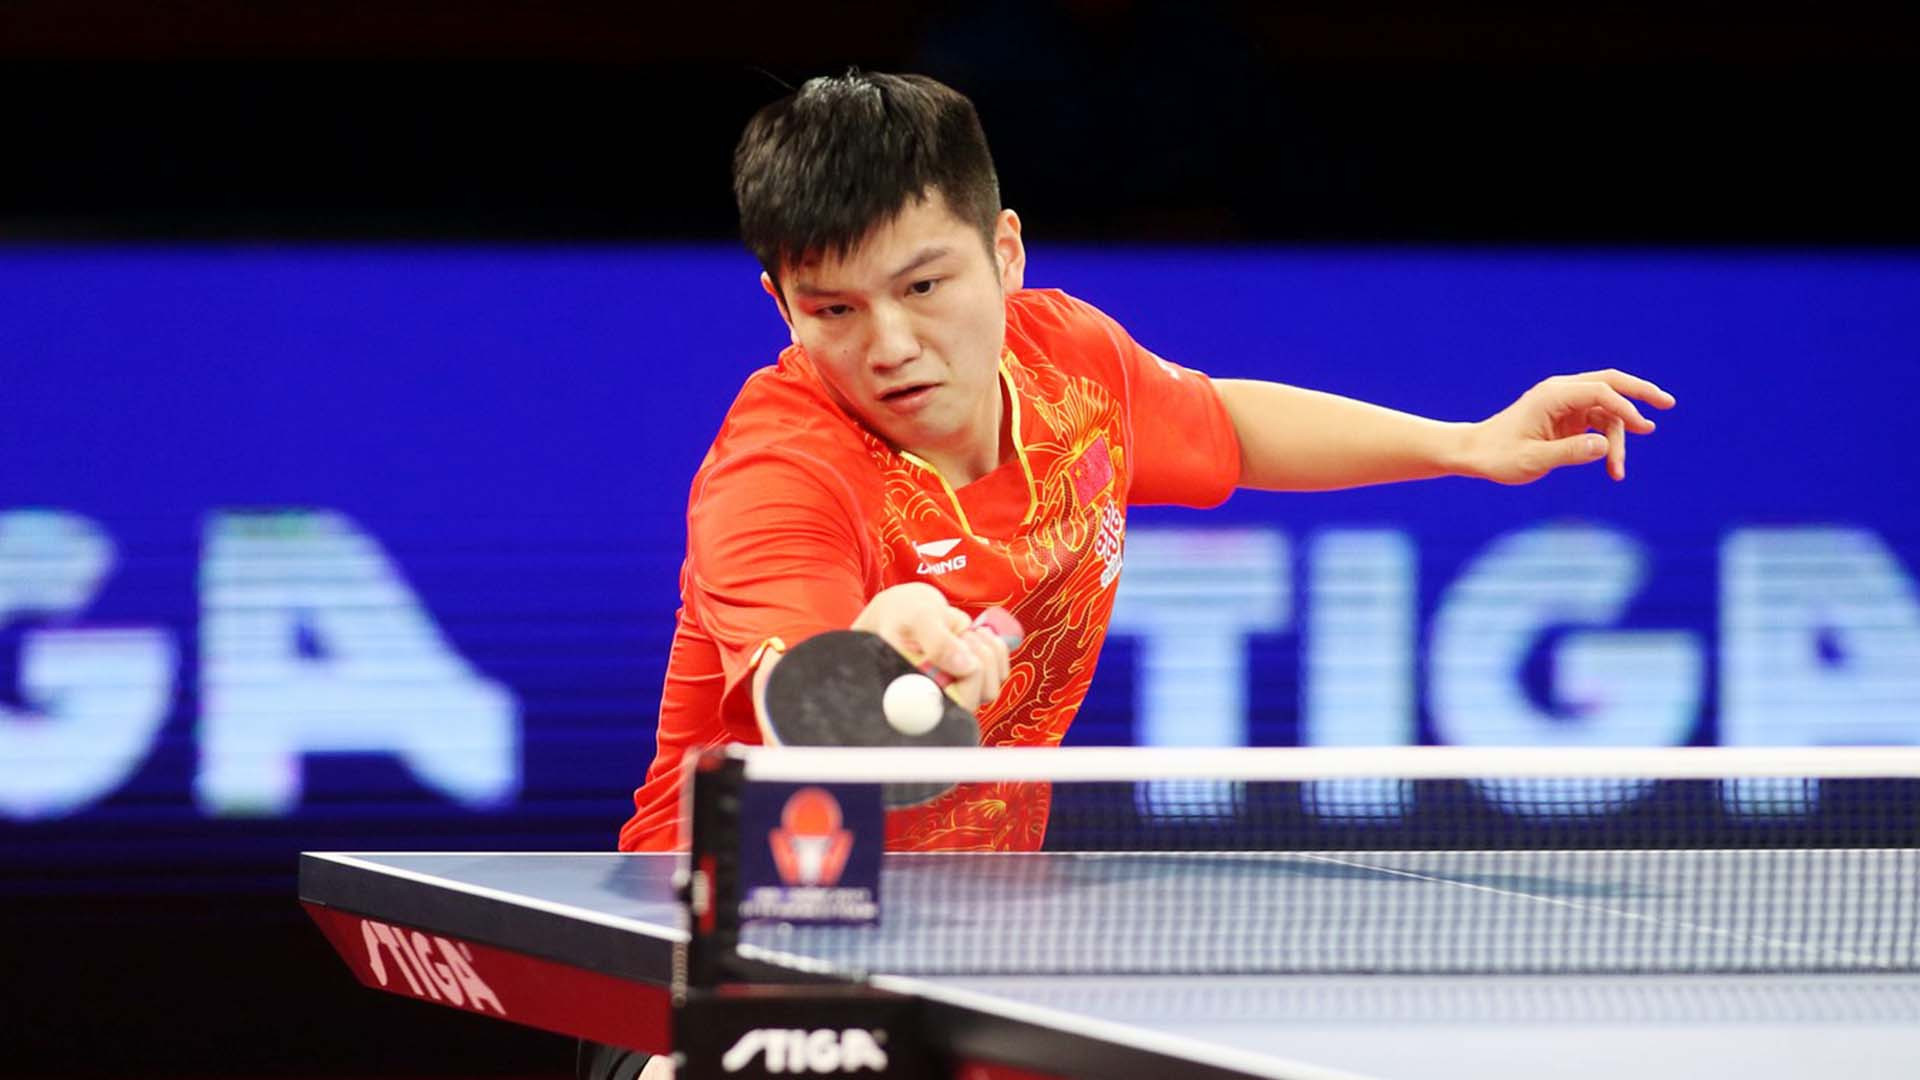 China's top seed Fan Zhedong will play compatriot and number two seed Xu Xin in tomorrow's men's singles final at the ITTF Swedish Open ©ITTF